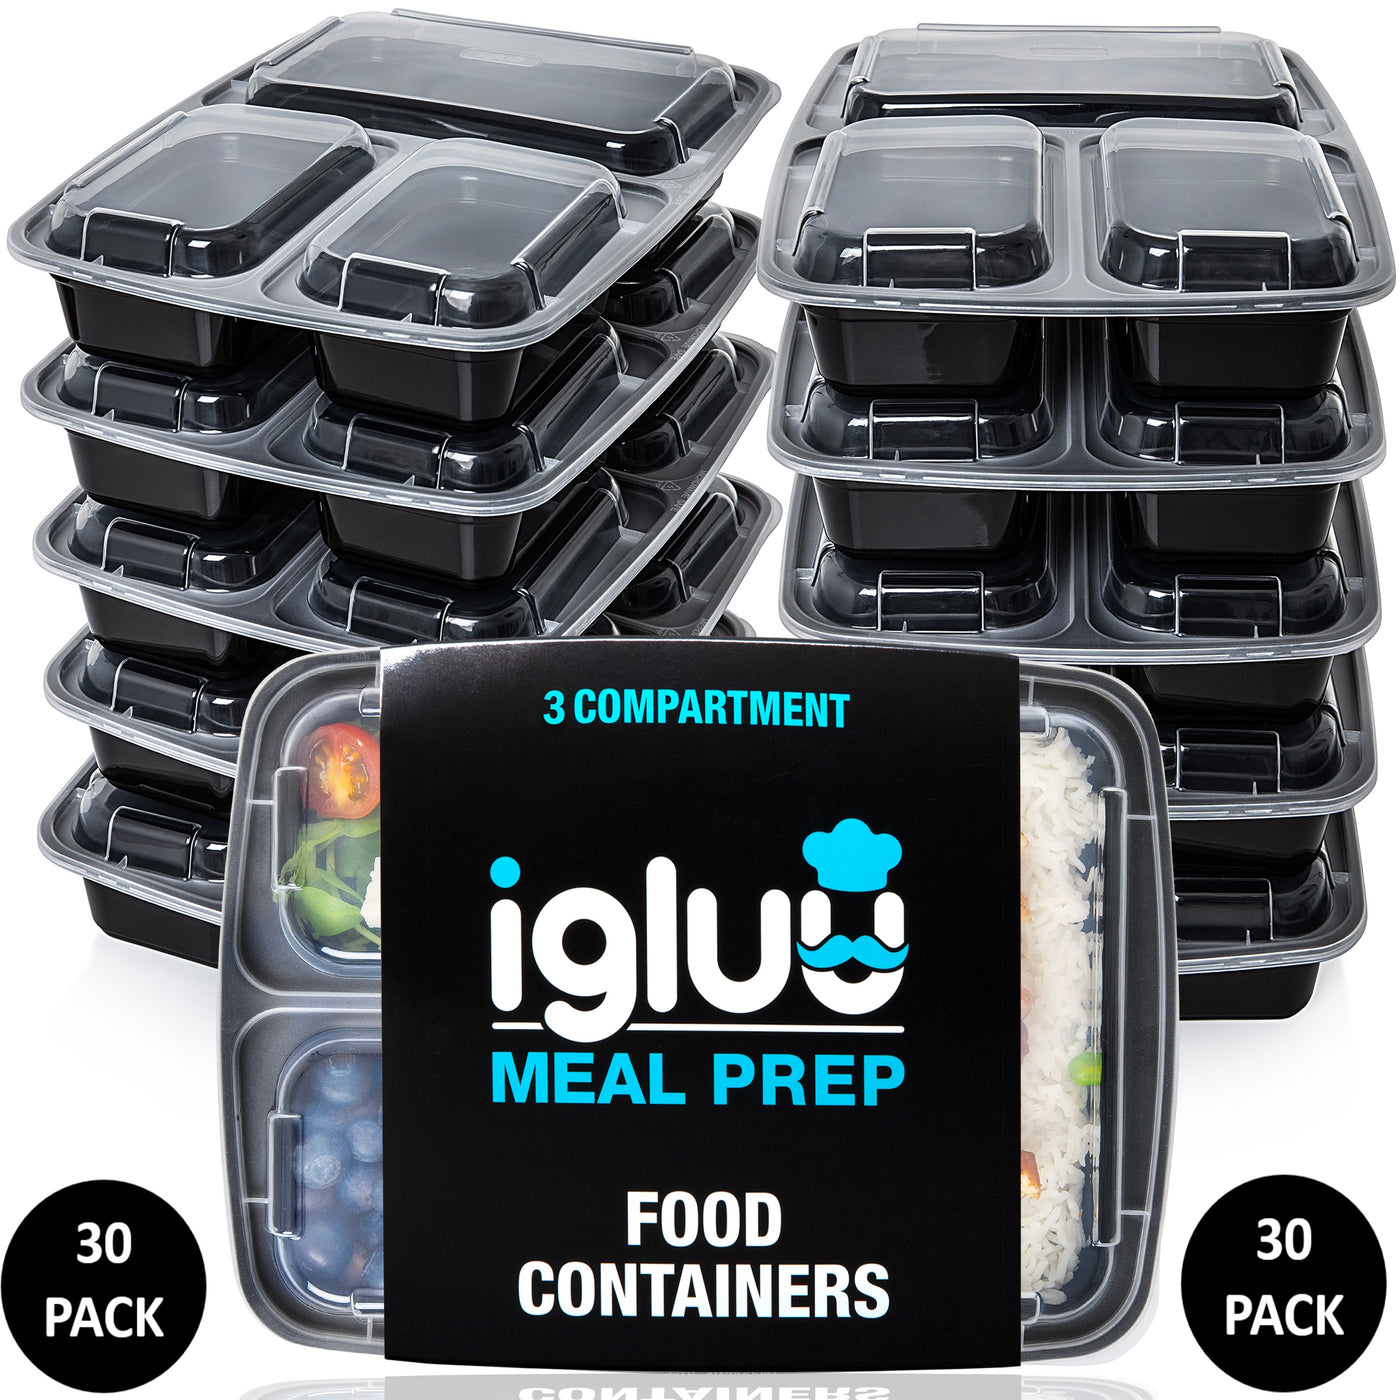 3 Compartment Meal Prep Food Containers with Airtight Lids